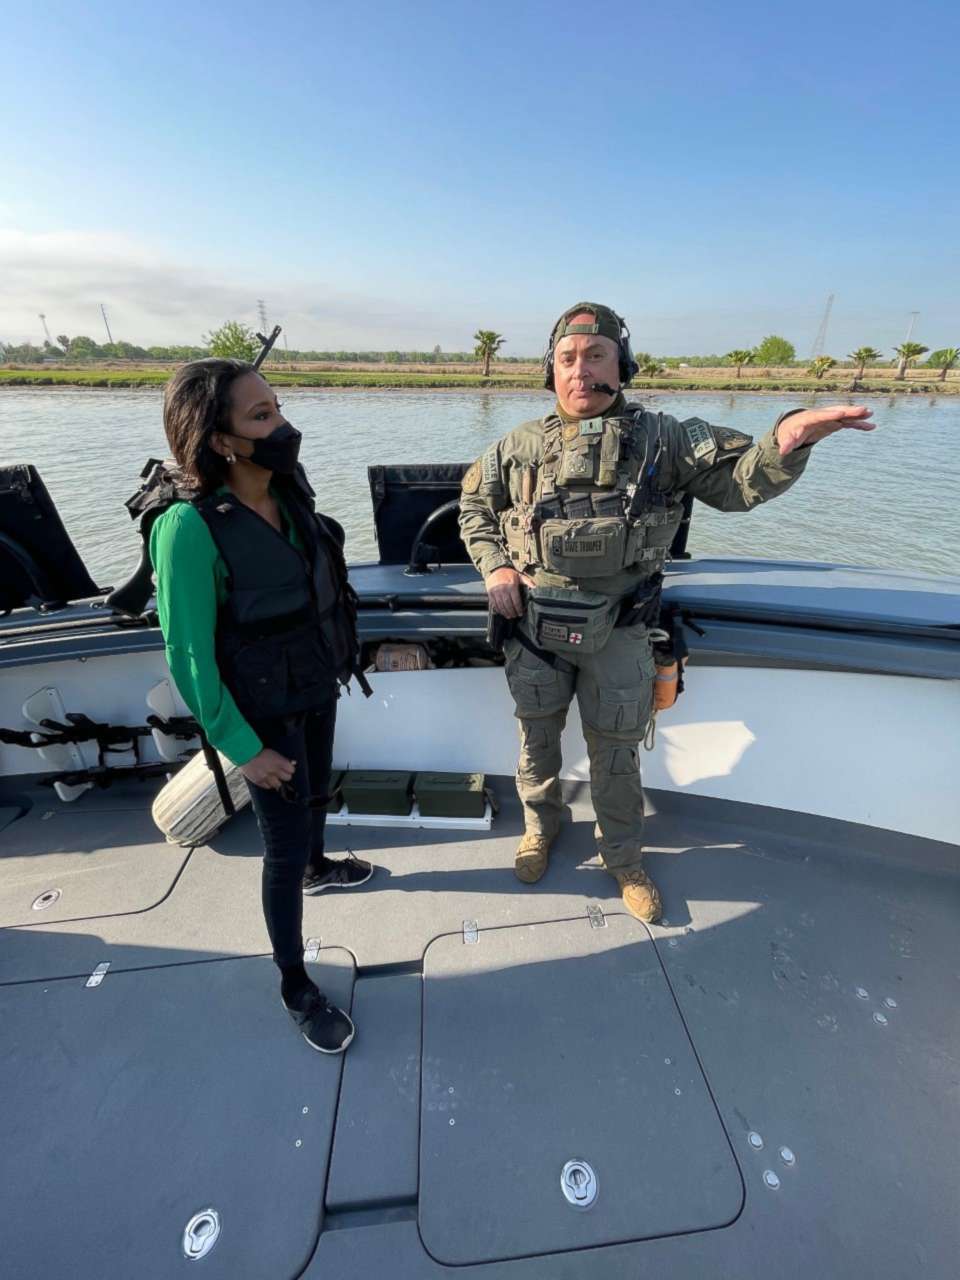 PHOTO: ABC News' Rachel Scott patrols the Rio Grande with Texas State troopers looking for migrants trying to cross into the United States.